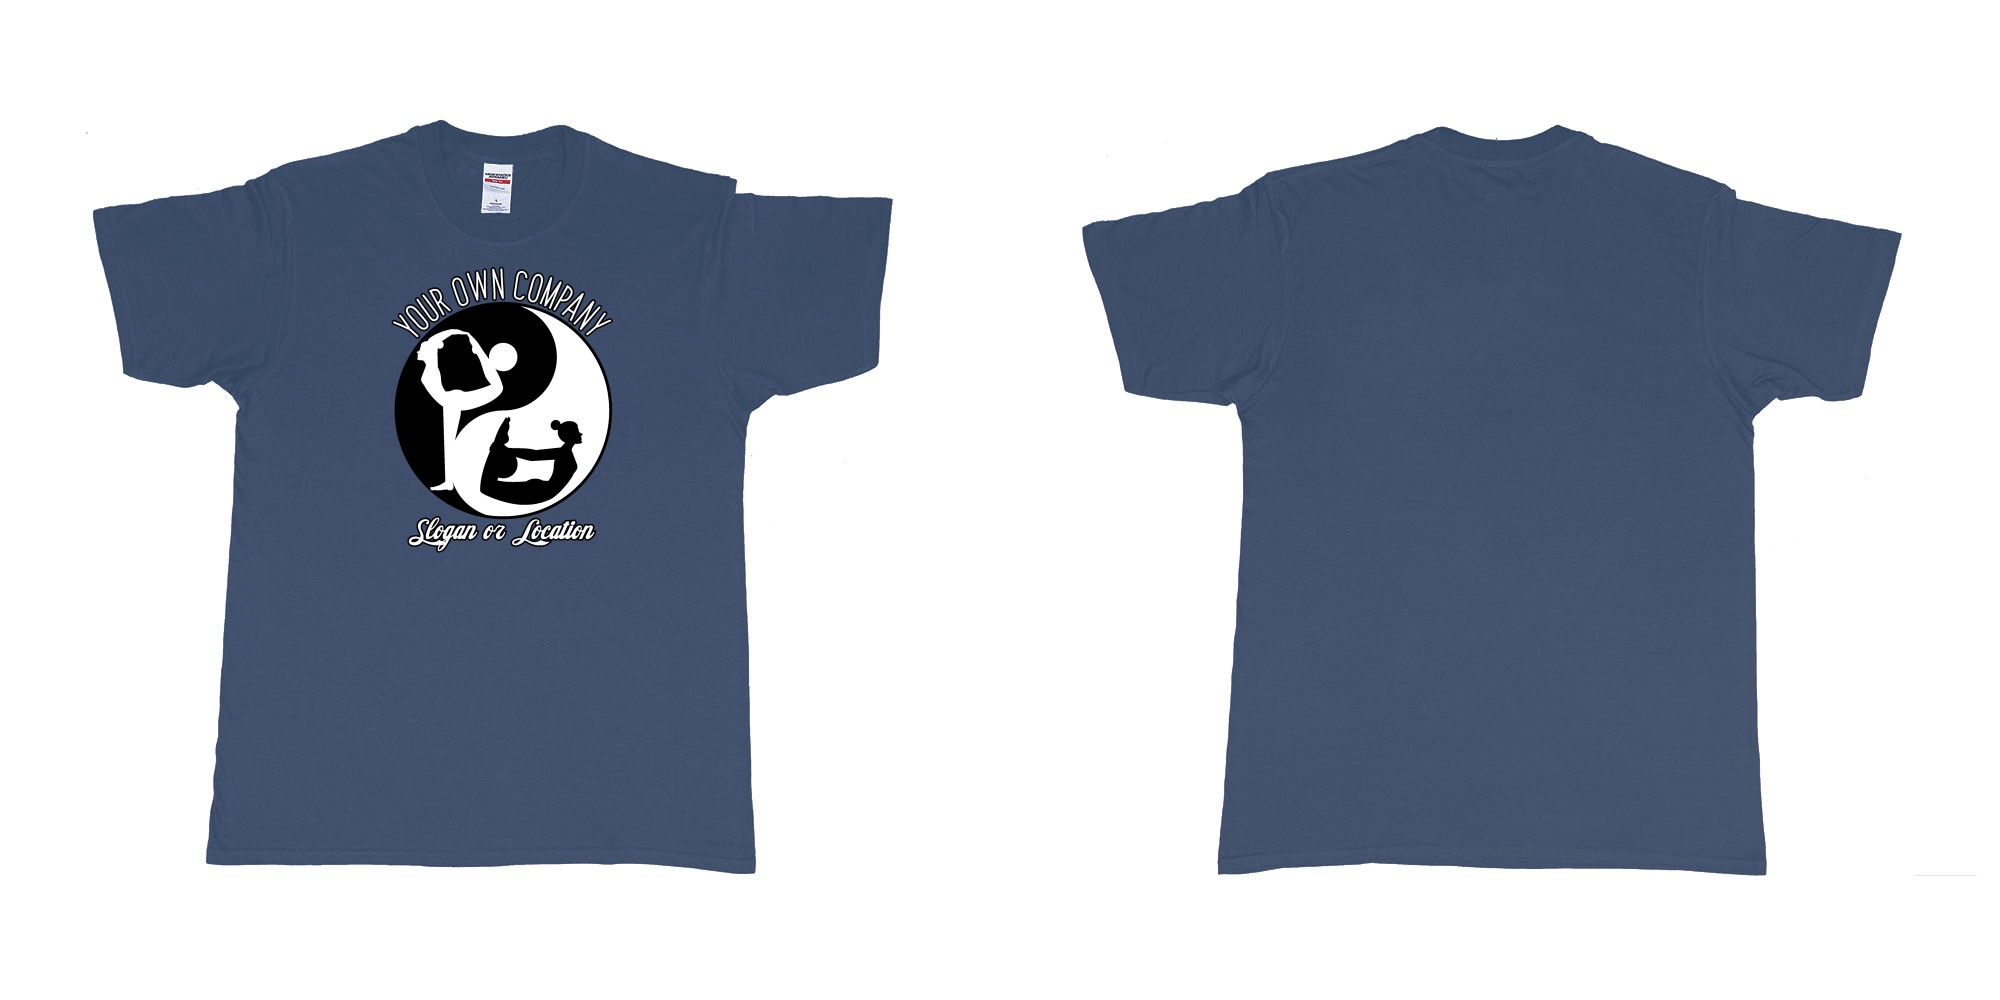 Custom tshirt design yin yang yoga balance custom studio t shirt in fabric color navy choice your own text made in Bali by The Pirate Way